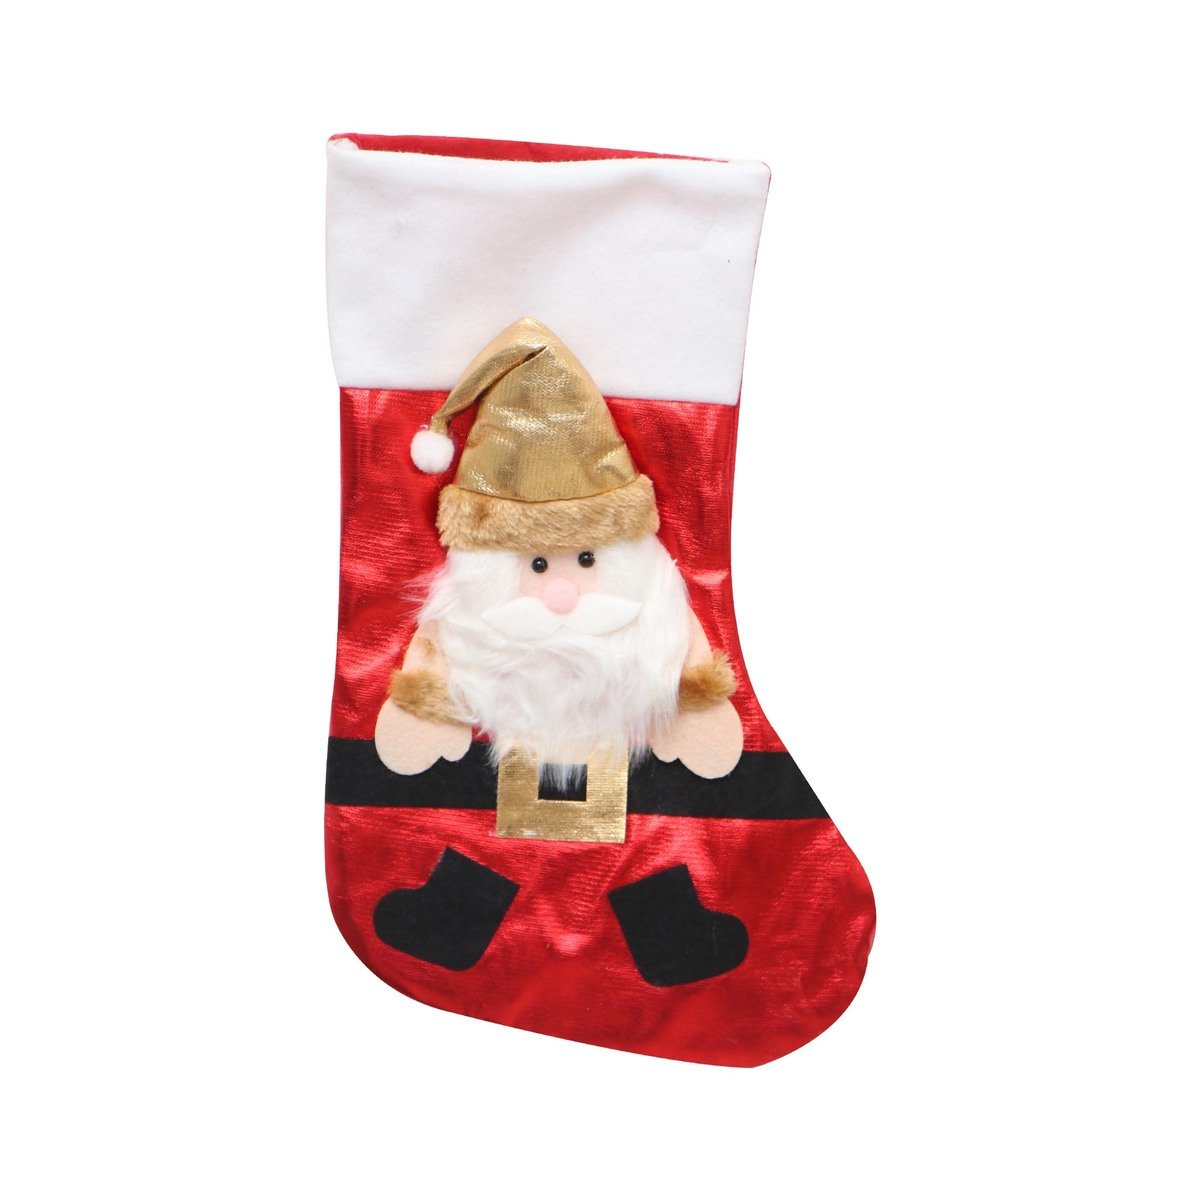 Party Fusion X'mas Stockings 23x37cm J-118 Assorted